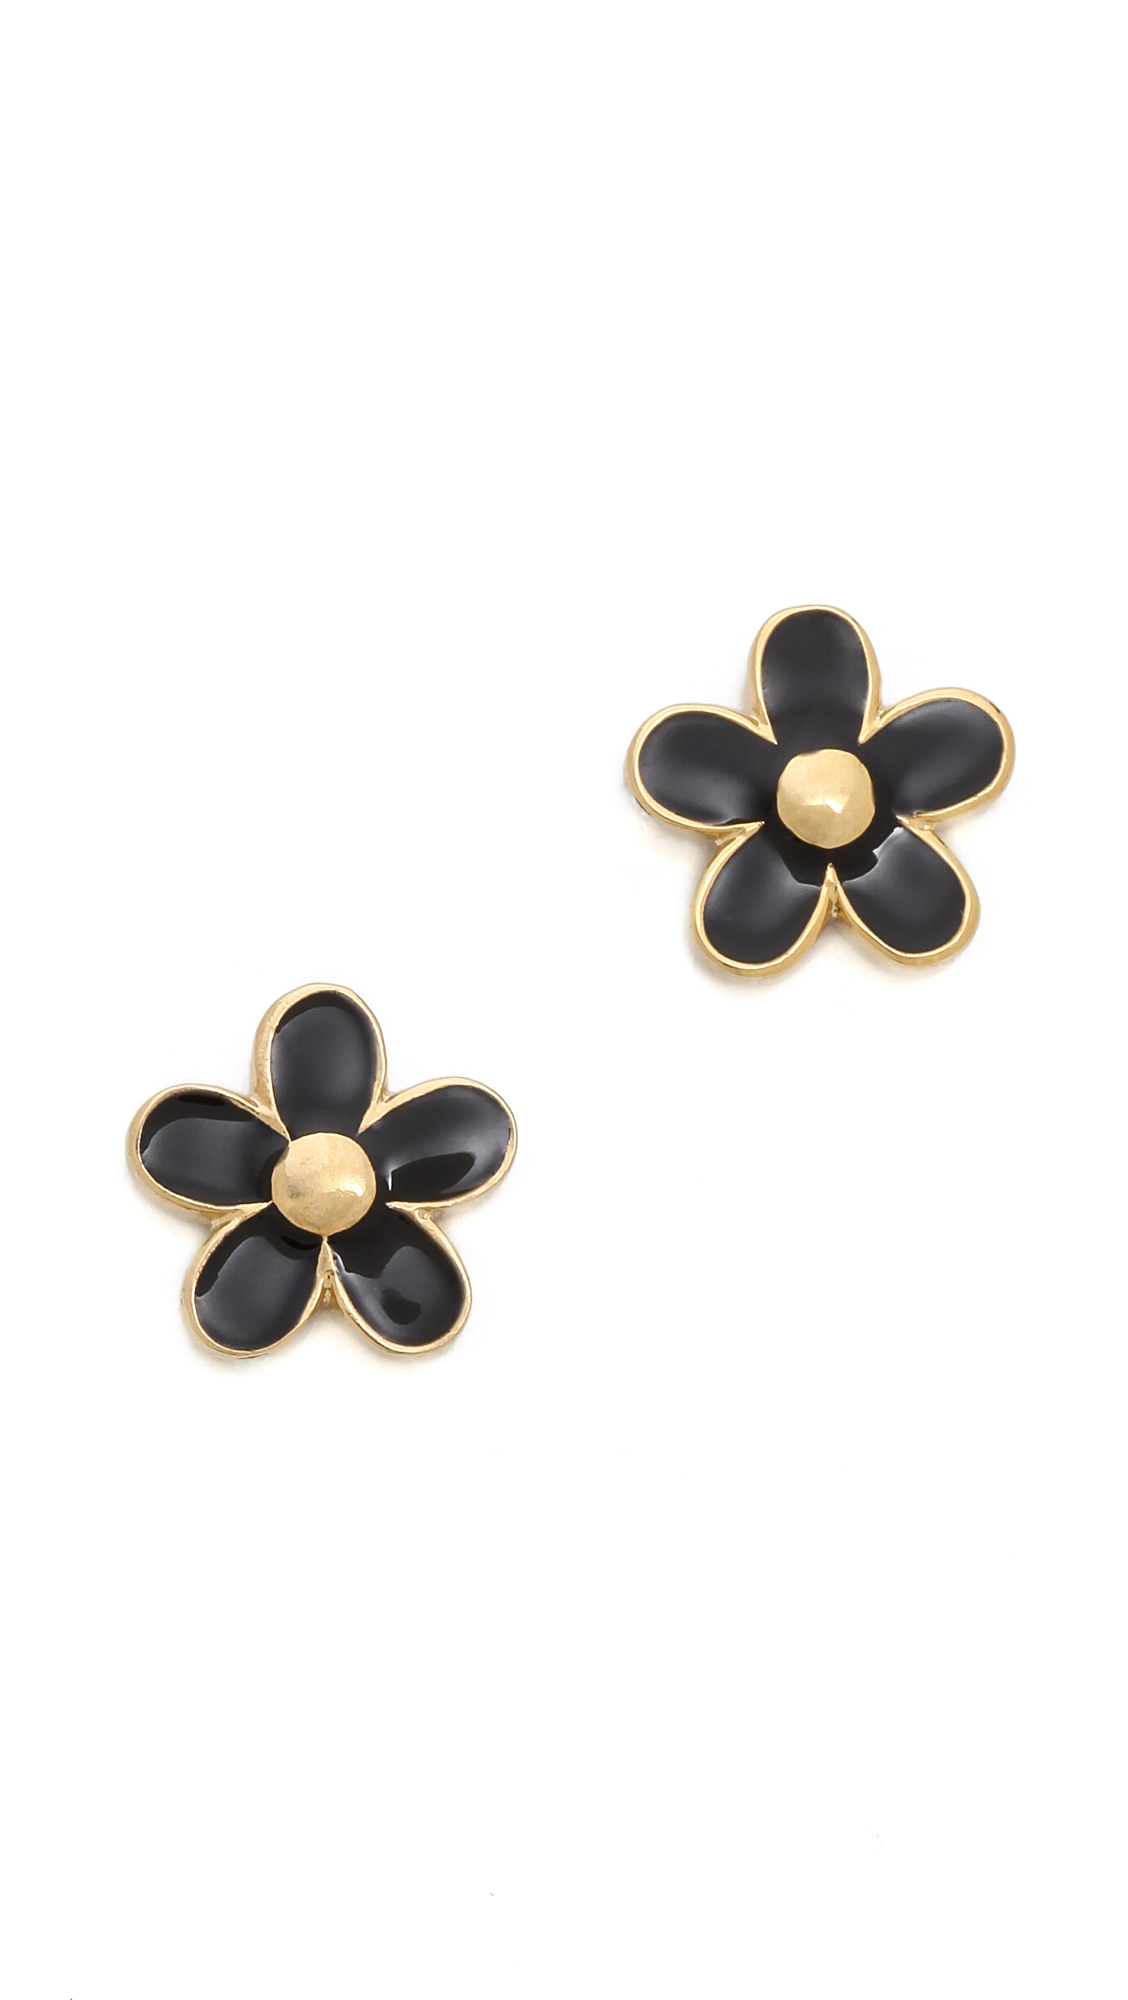 Aggregate more than 121 marc jacobs daisy earrings best